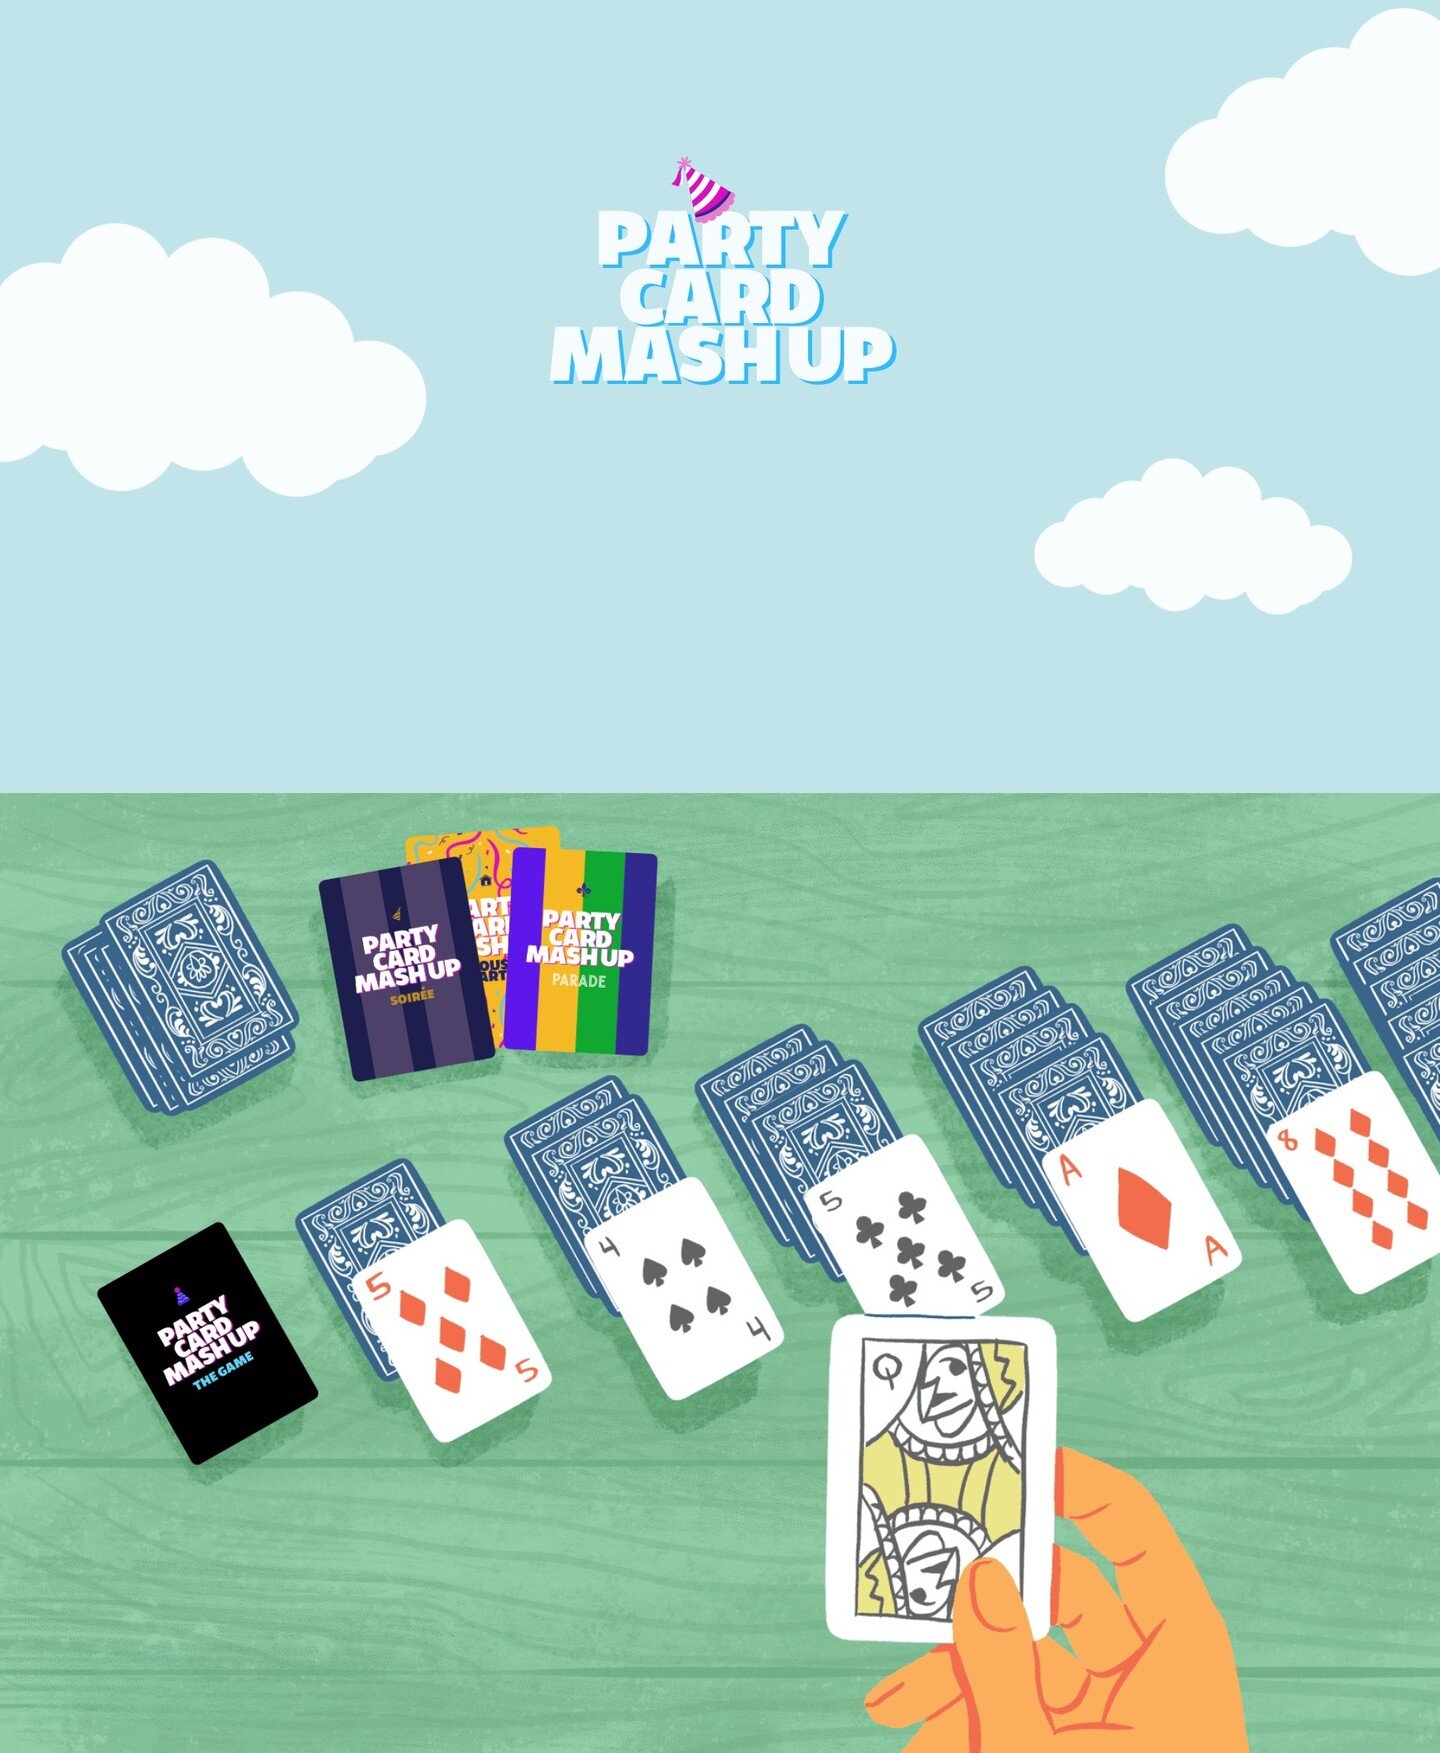 It's SPRANG time Krewe Members!

Which means sunshine, getting back outdoors, pollen, pollen, and pollen. But also a time to reconnect with your friends and loved ones over rounds of Party Card Mash Up games! But we are not alone - more games have jo